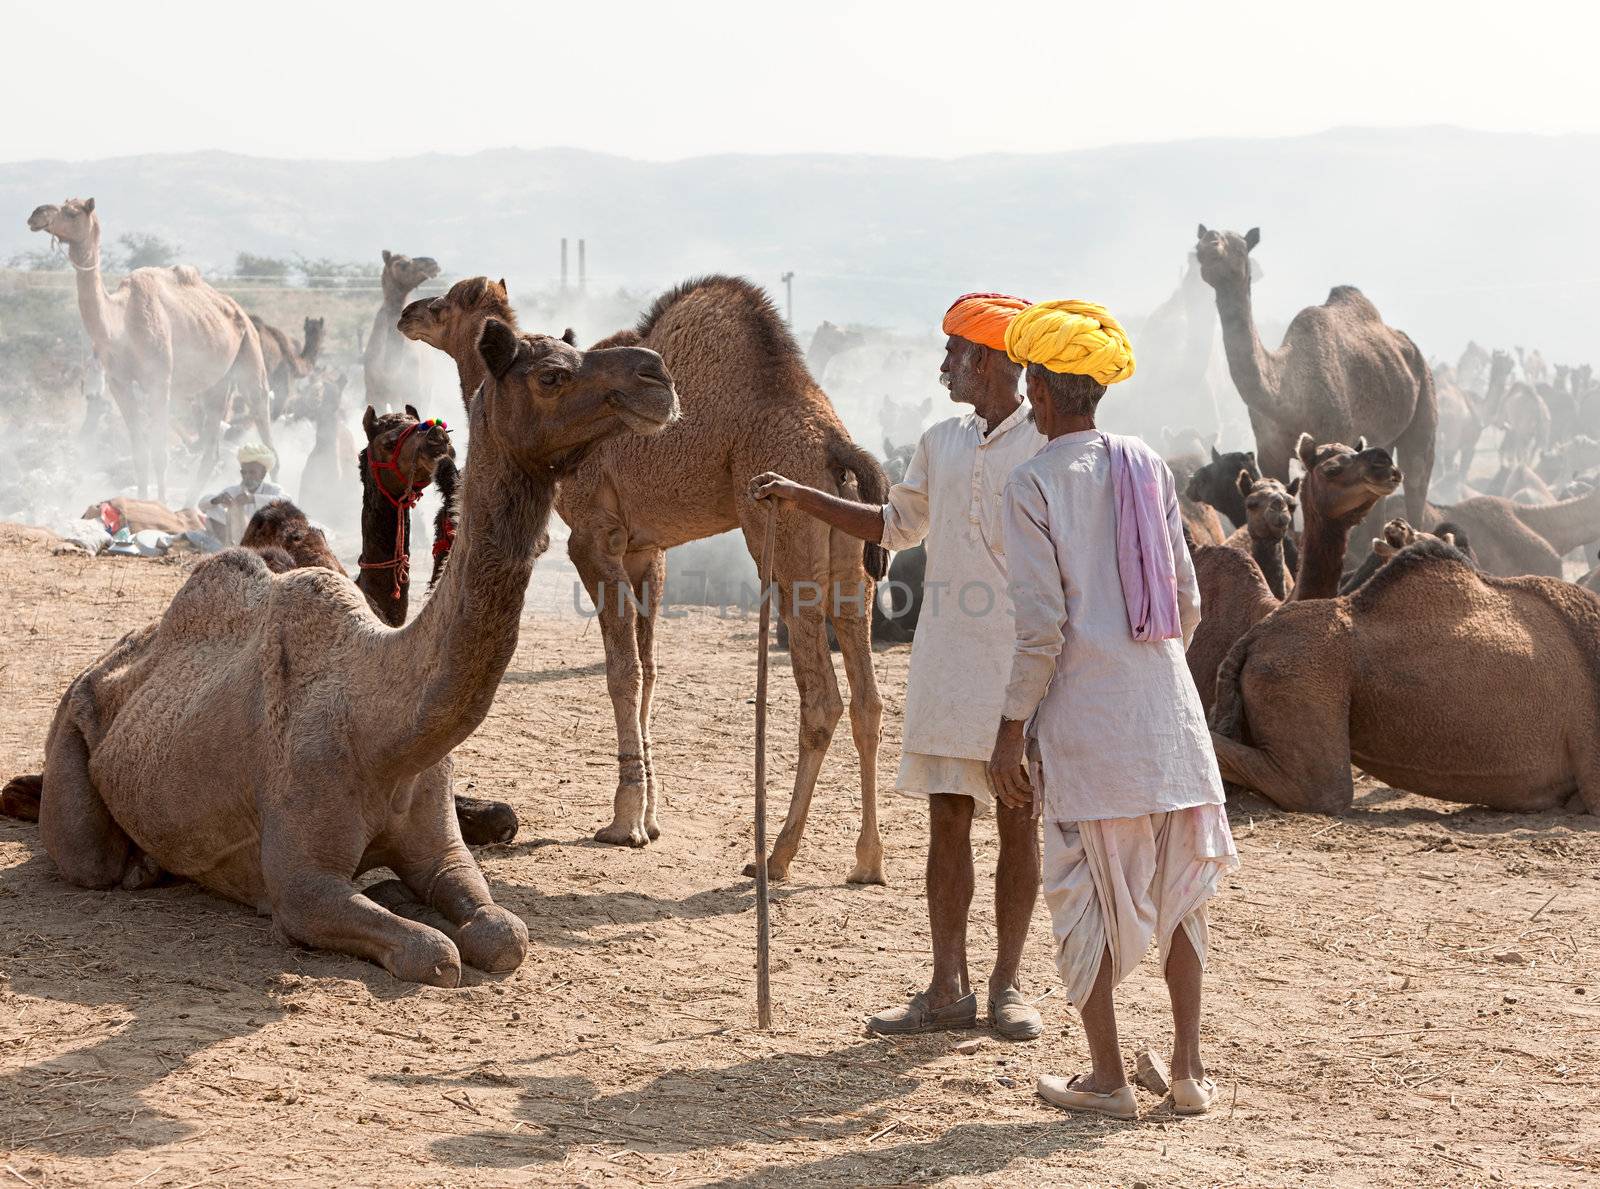 PUSHKAR, INDIA - NOVEMBER 21: An unidentified men attends the Pushkar fair on November 21, 2012 in Pushkar, Rajasthan, India. Farmers and traders from all over Rajasthan flock for the annual fair